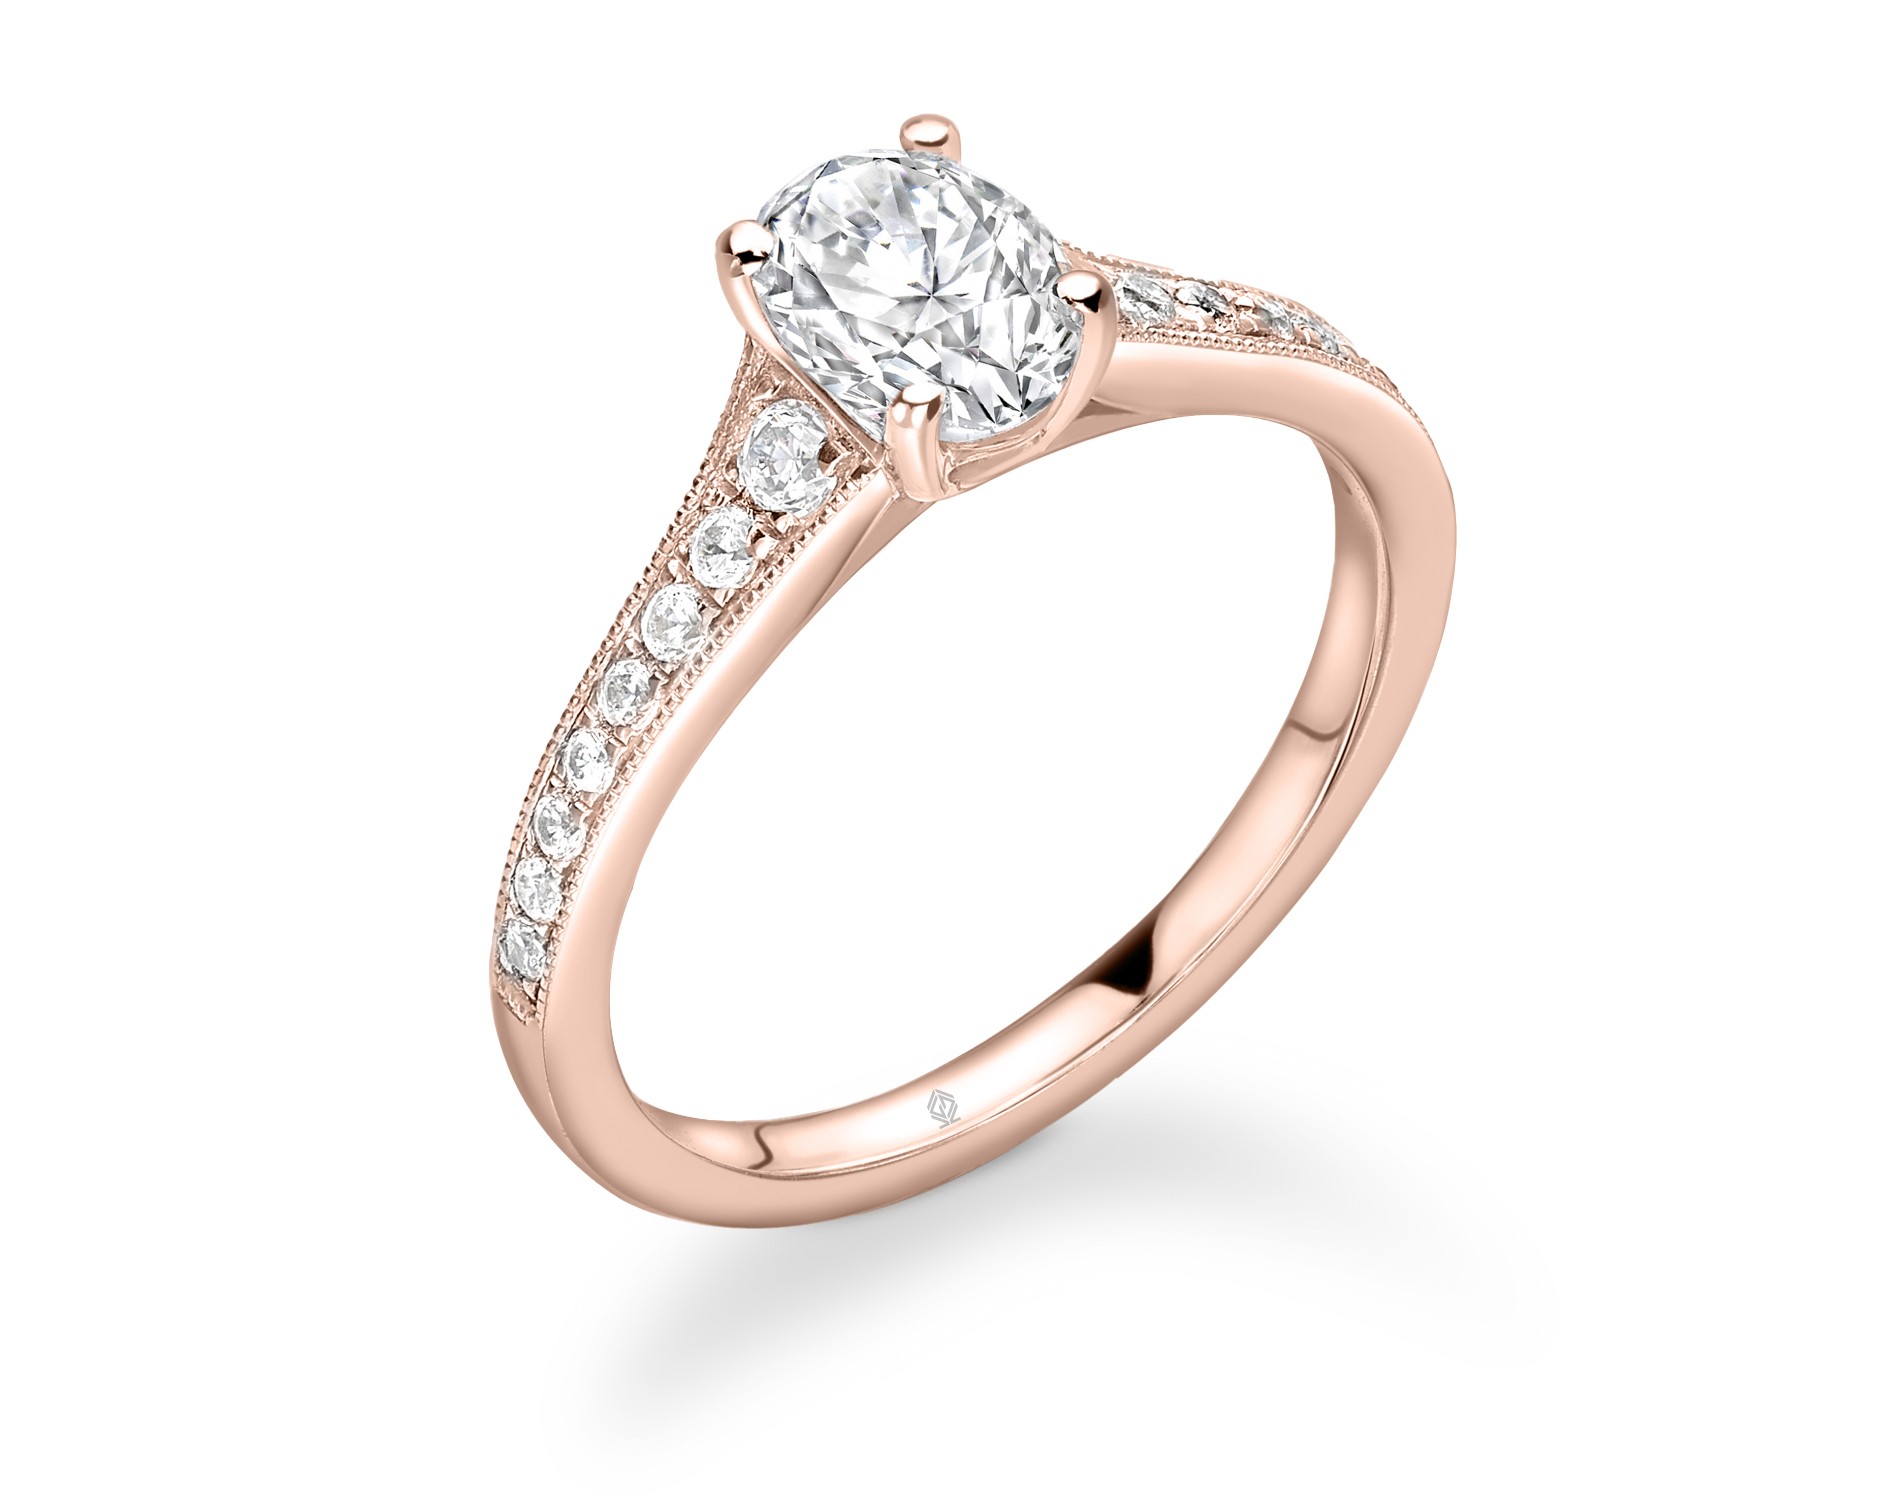 18K ROSE GOLD OVAL CUT 4 PRONGS DIAMOND ENGAGEMENT RING WITH SIDE STONES CHANNEL SET